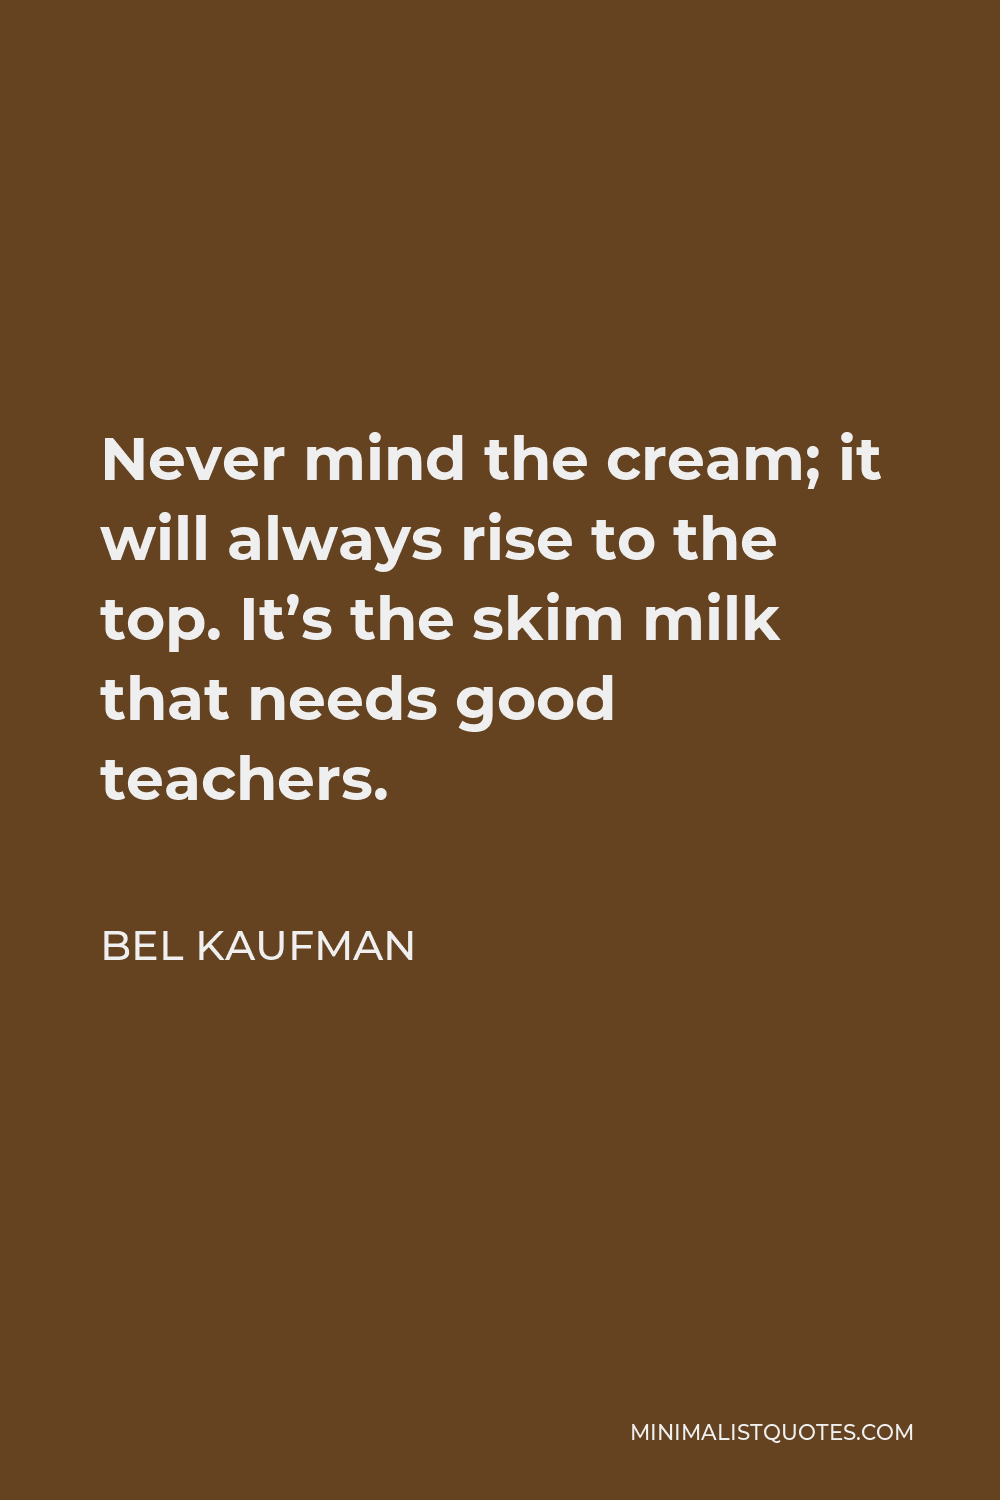 Bel Kaufman Quote - Never mind the cream; it will always rise to the top. It’s the skim milk that needs good teachers.